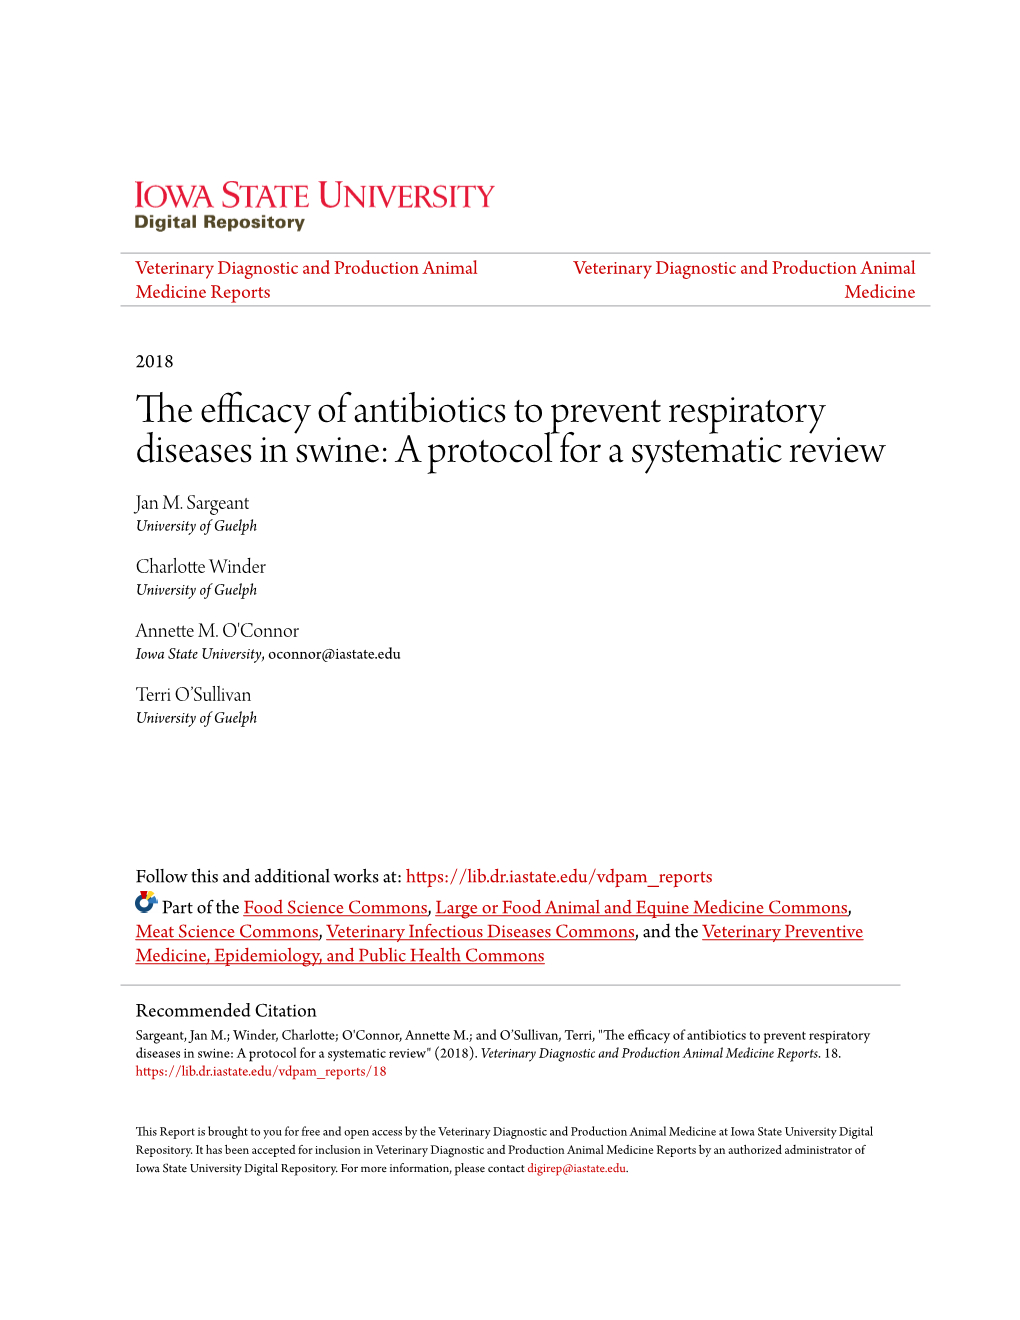 The Efficacy of Antibiotics to Prevent Respiratory Diseases in Swine: a Protocol for a Systematic Review Jan M